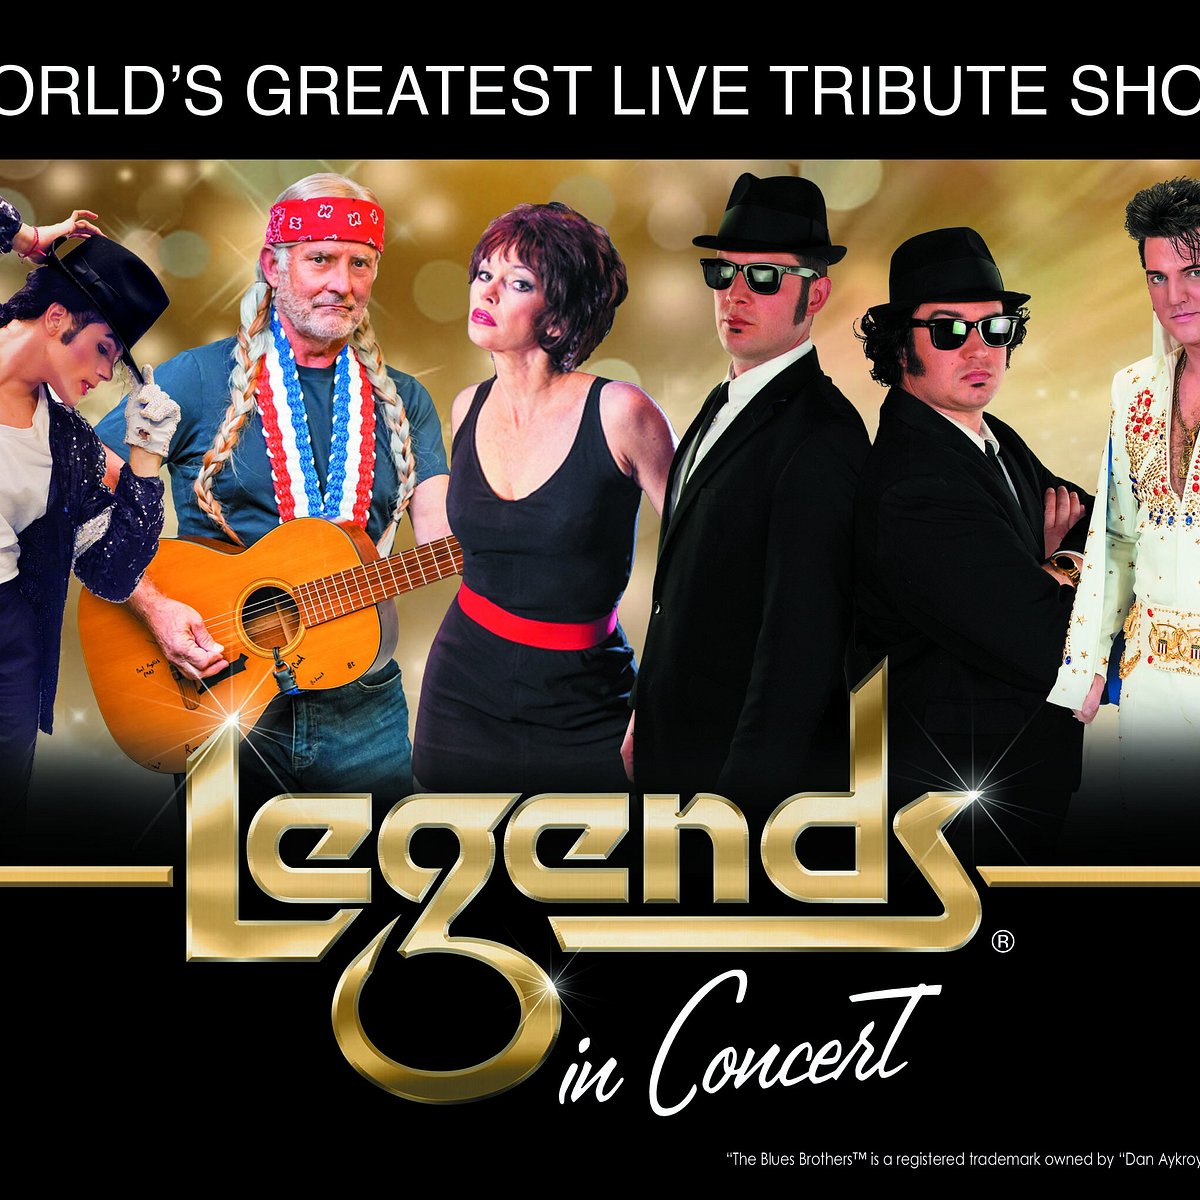 Legends in Concert  The Pioneer of Live Tribute Shows.